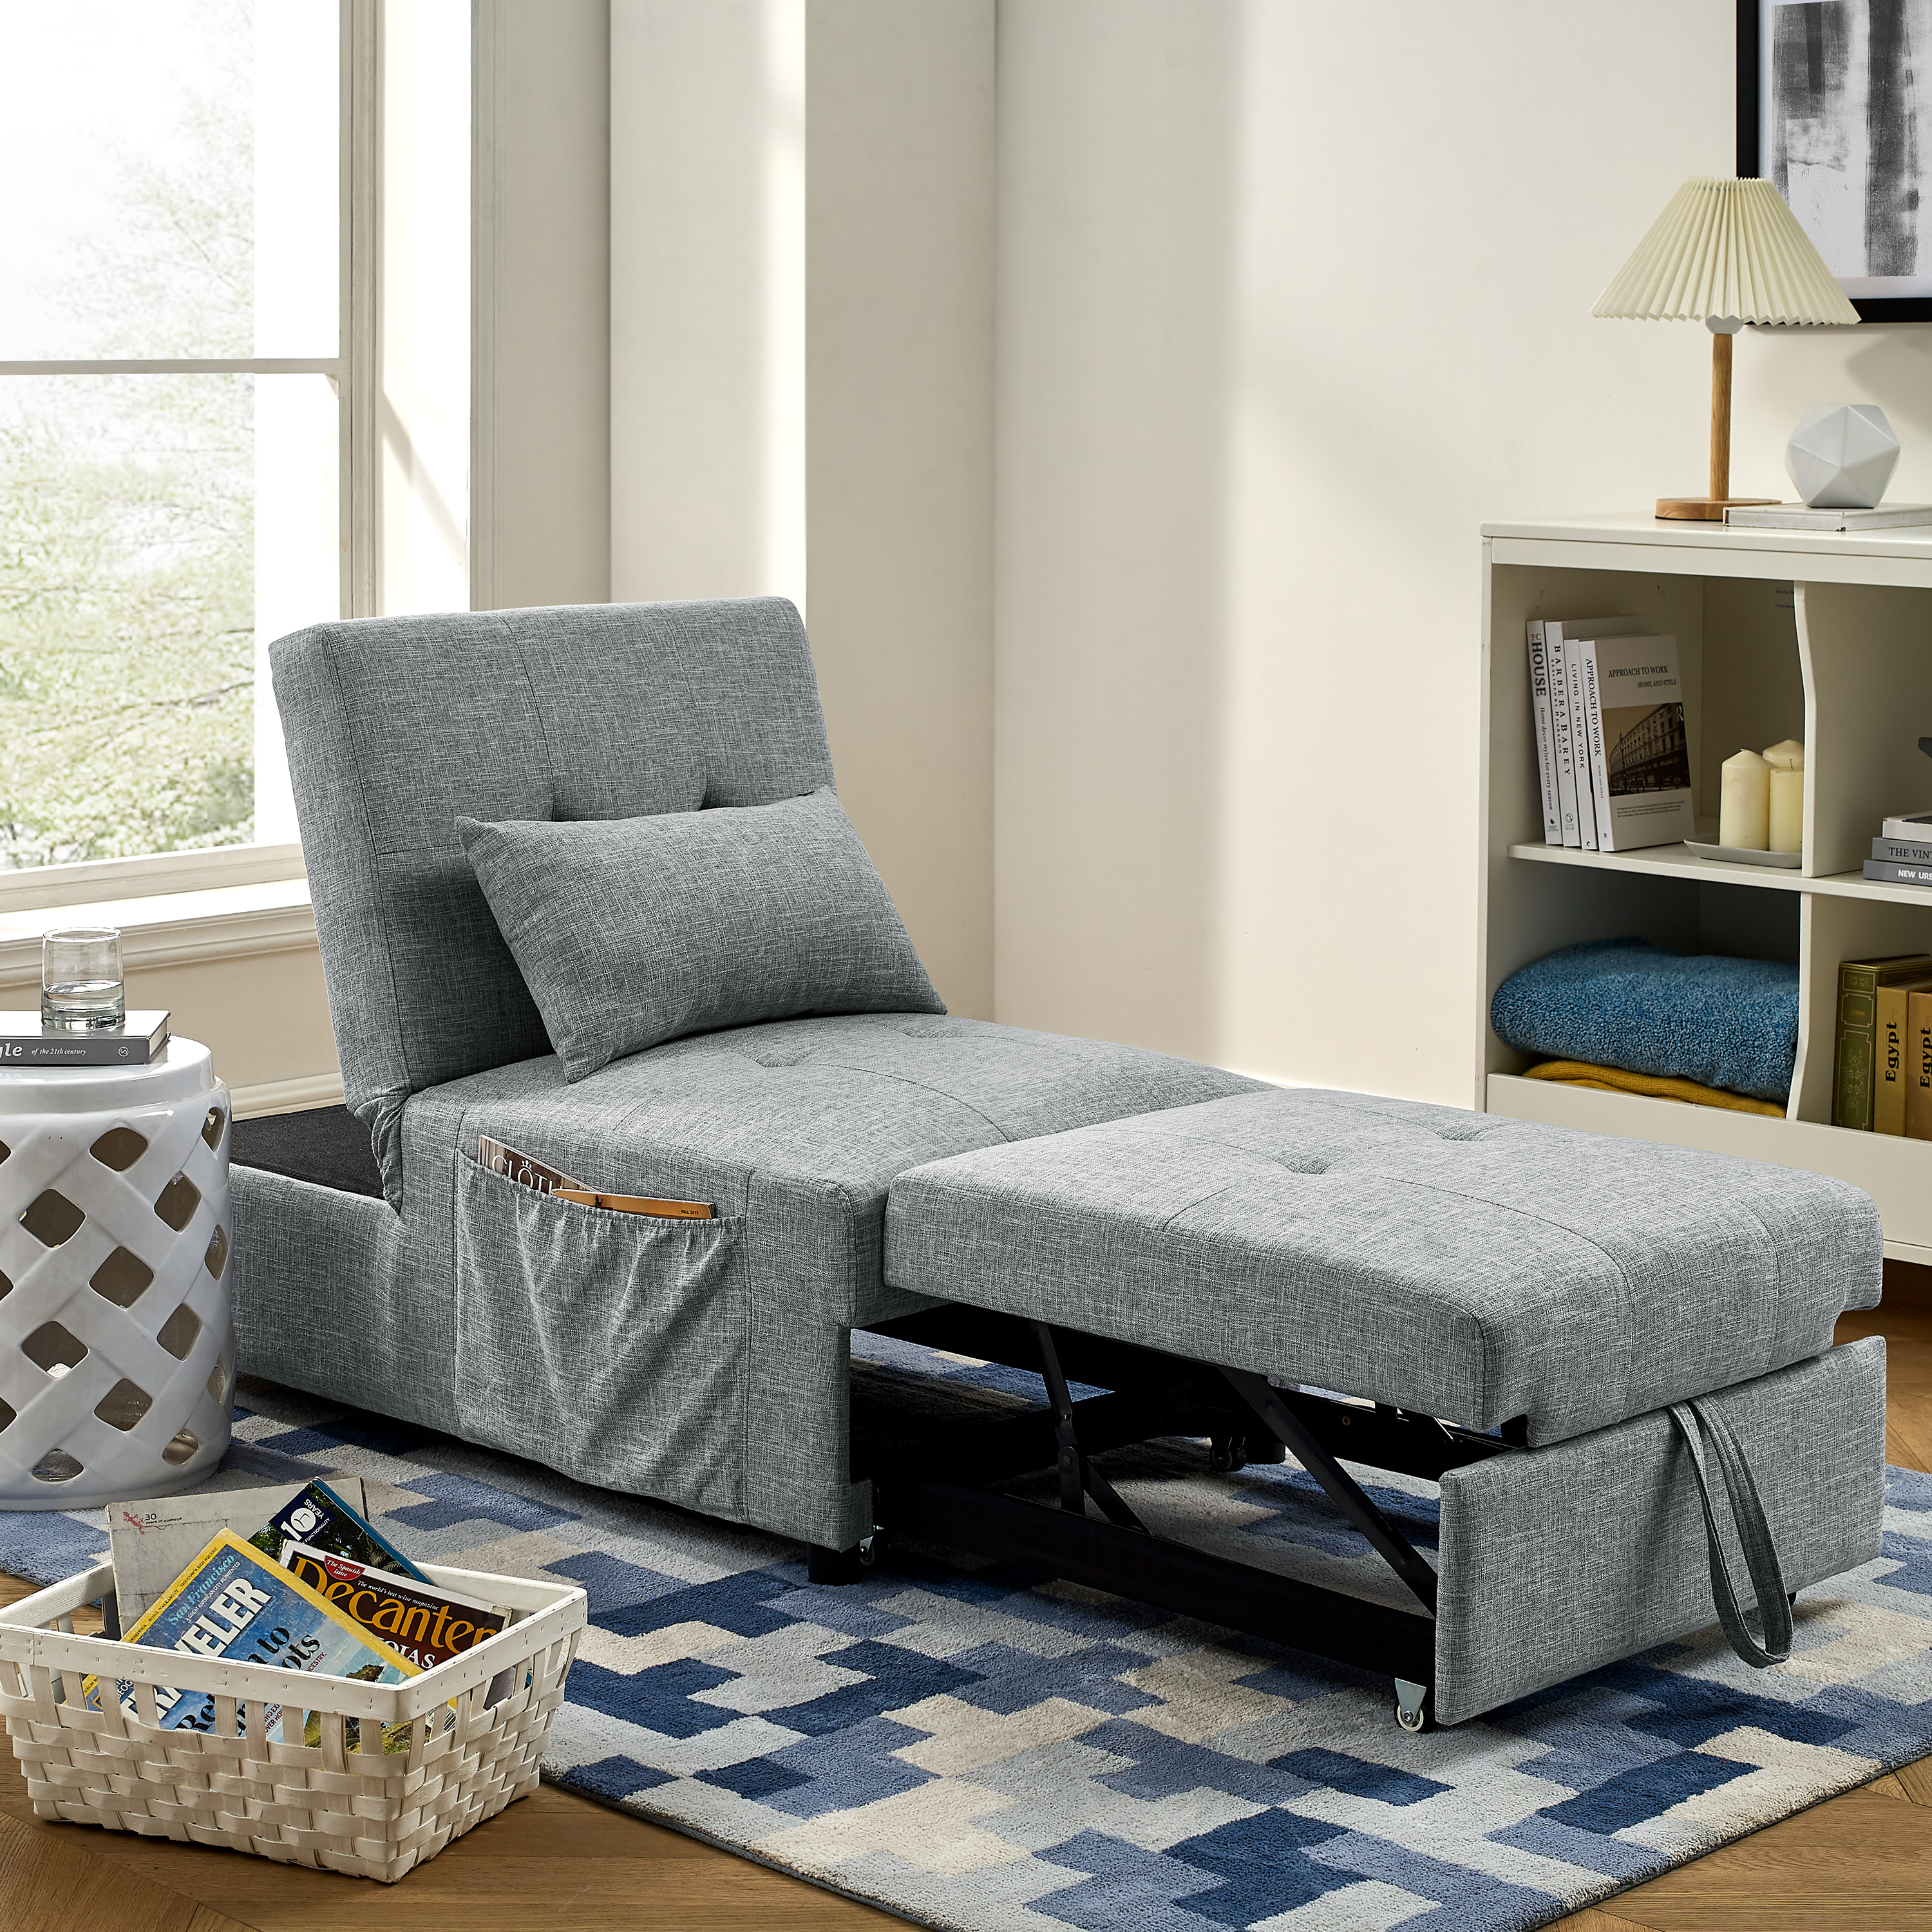 Folding Ottoman Sleeper Sofa Bed, 4 in 1 Function, Work as Ottoman, Chair ,Sofa Bed and Chaise Lounge for Small Space Living, Grey  (44&rdquo;&nbsp;x 26&rdquo;&nbsp;x 33&rdquo;H)-Boyel Living